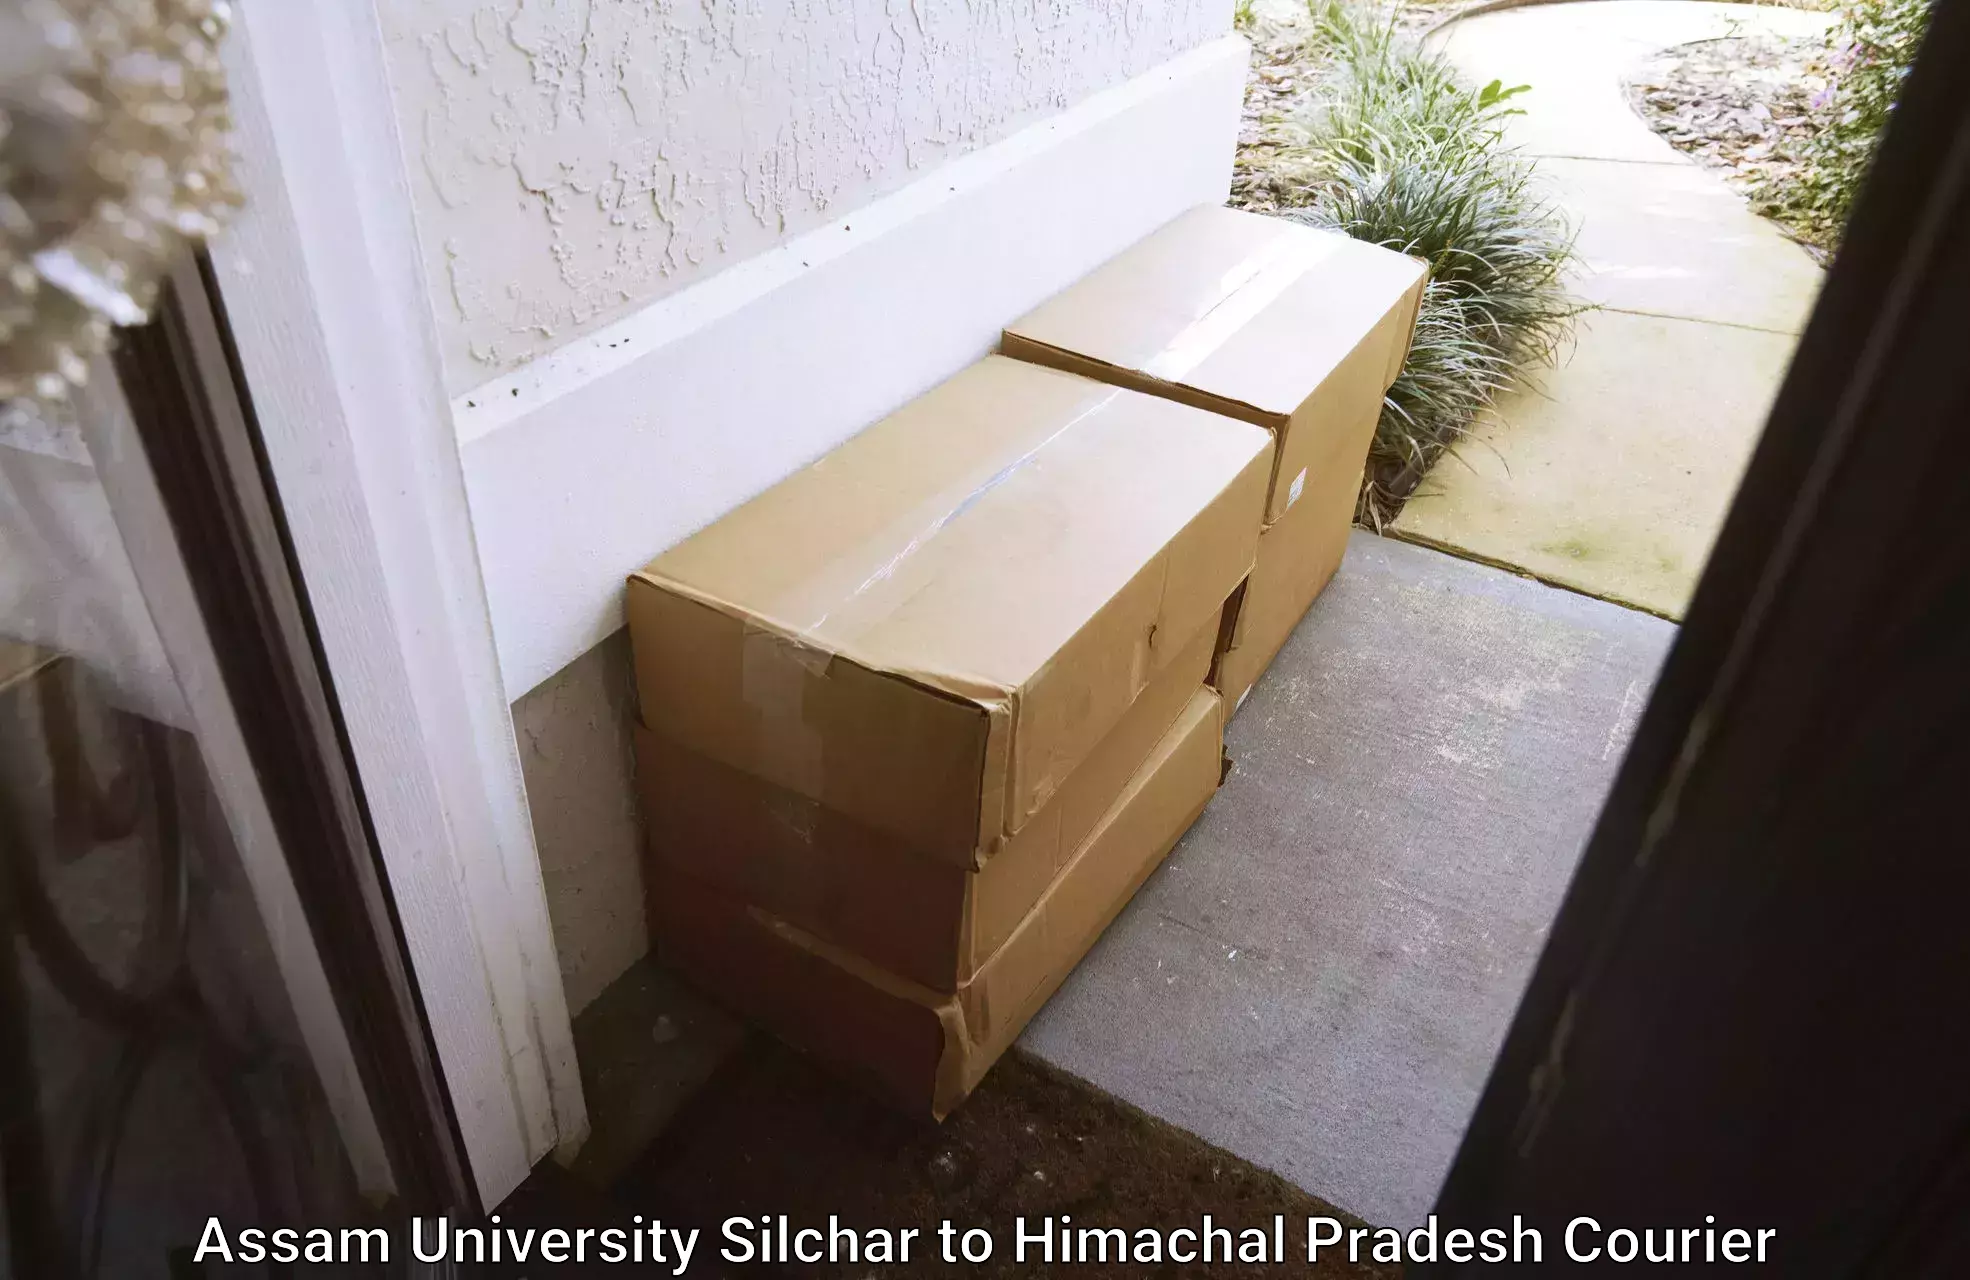 Express package delivery Assam University Silchar to Himachal Pradesh